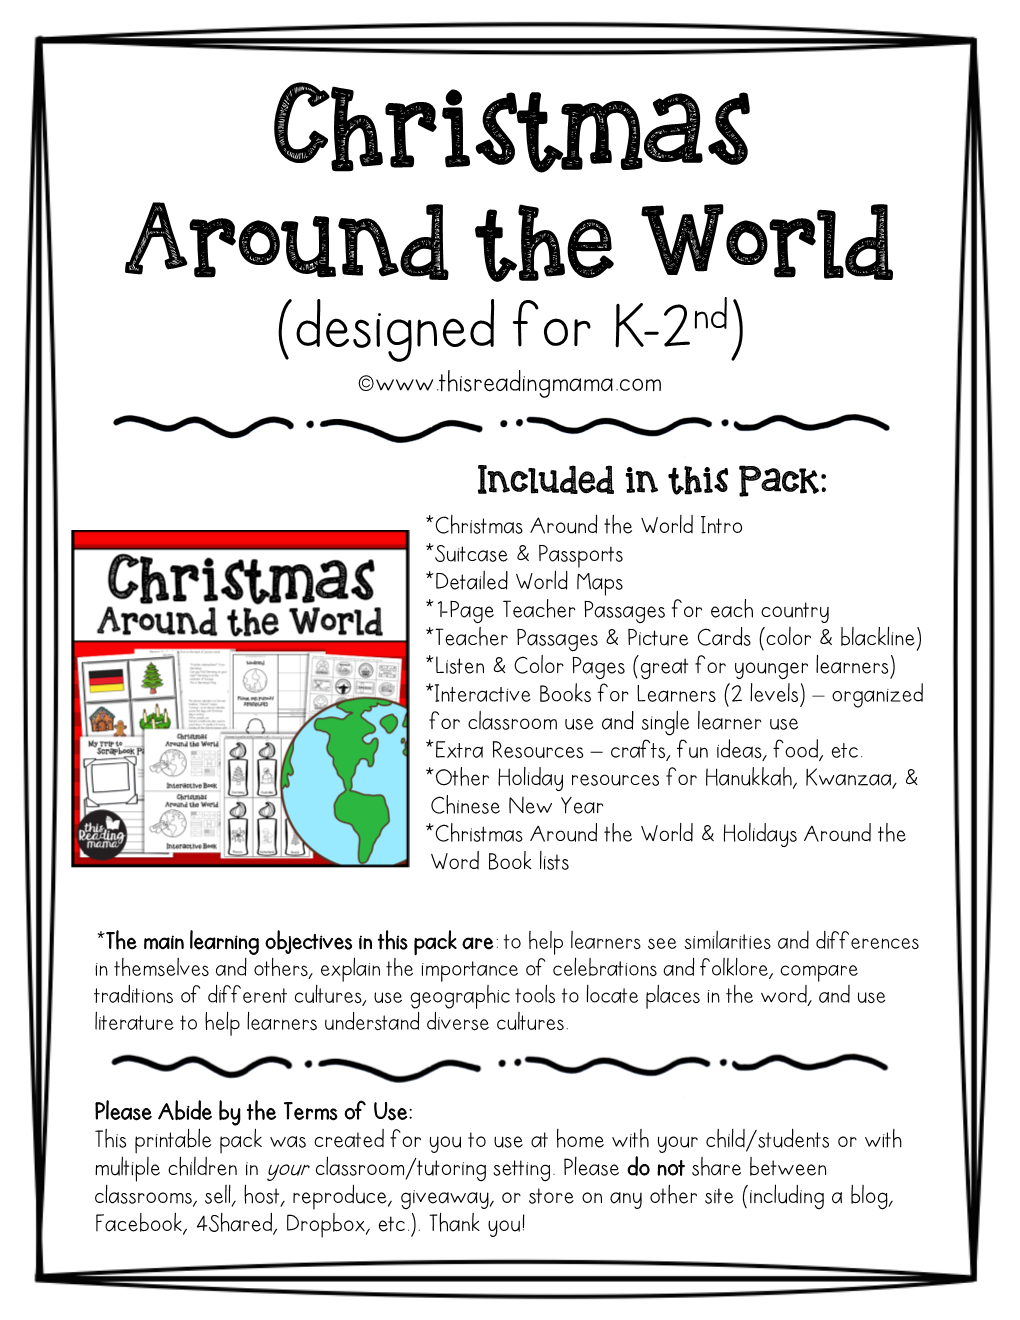 Christmas Around the World (Designed for K-2Nd) ©